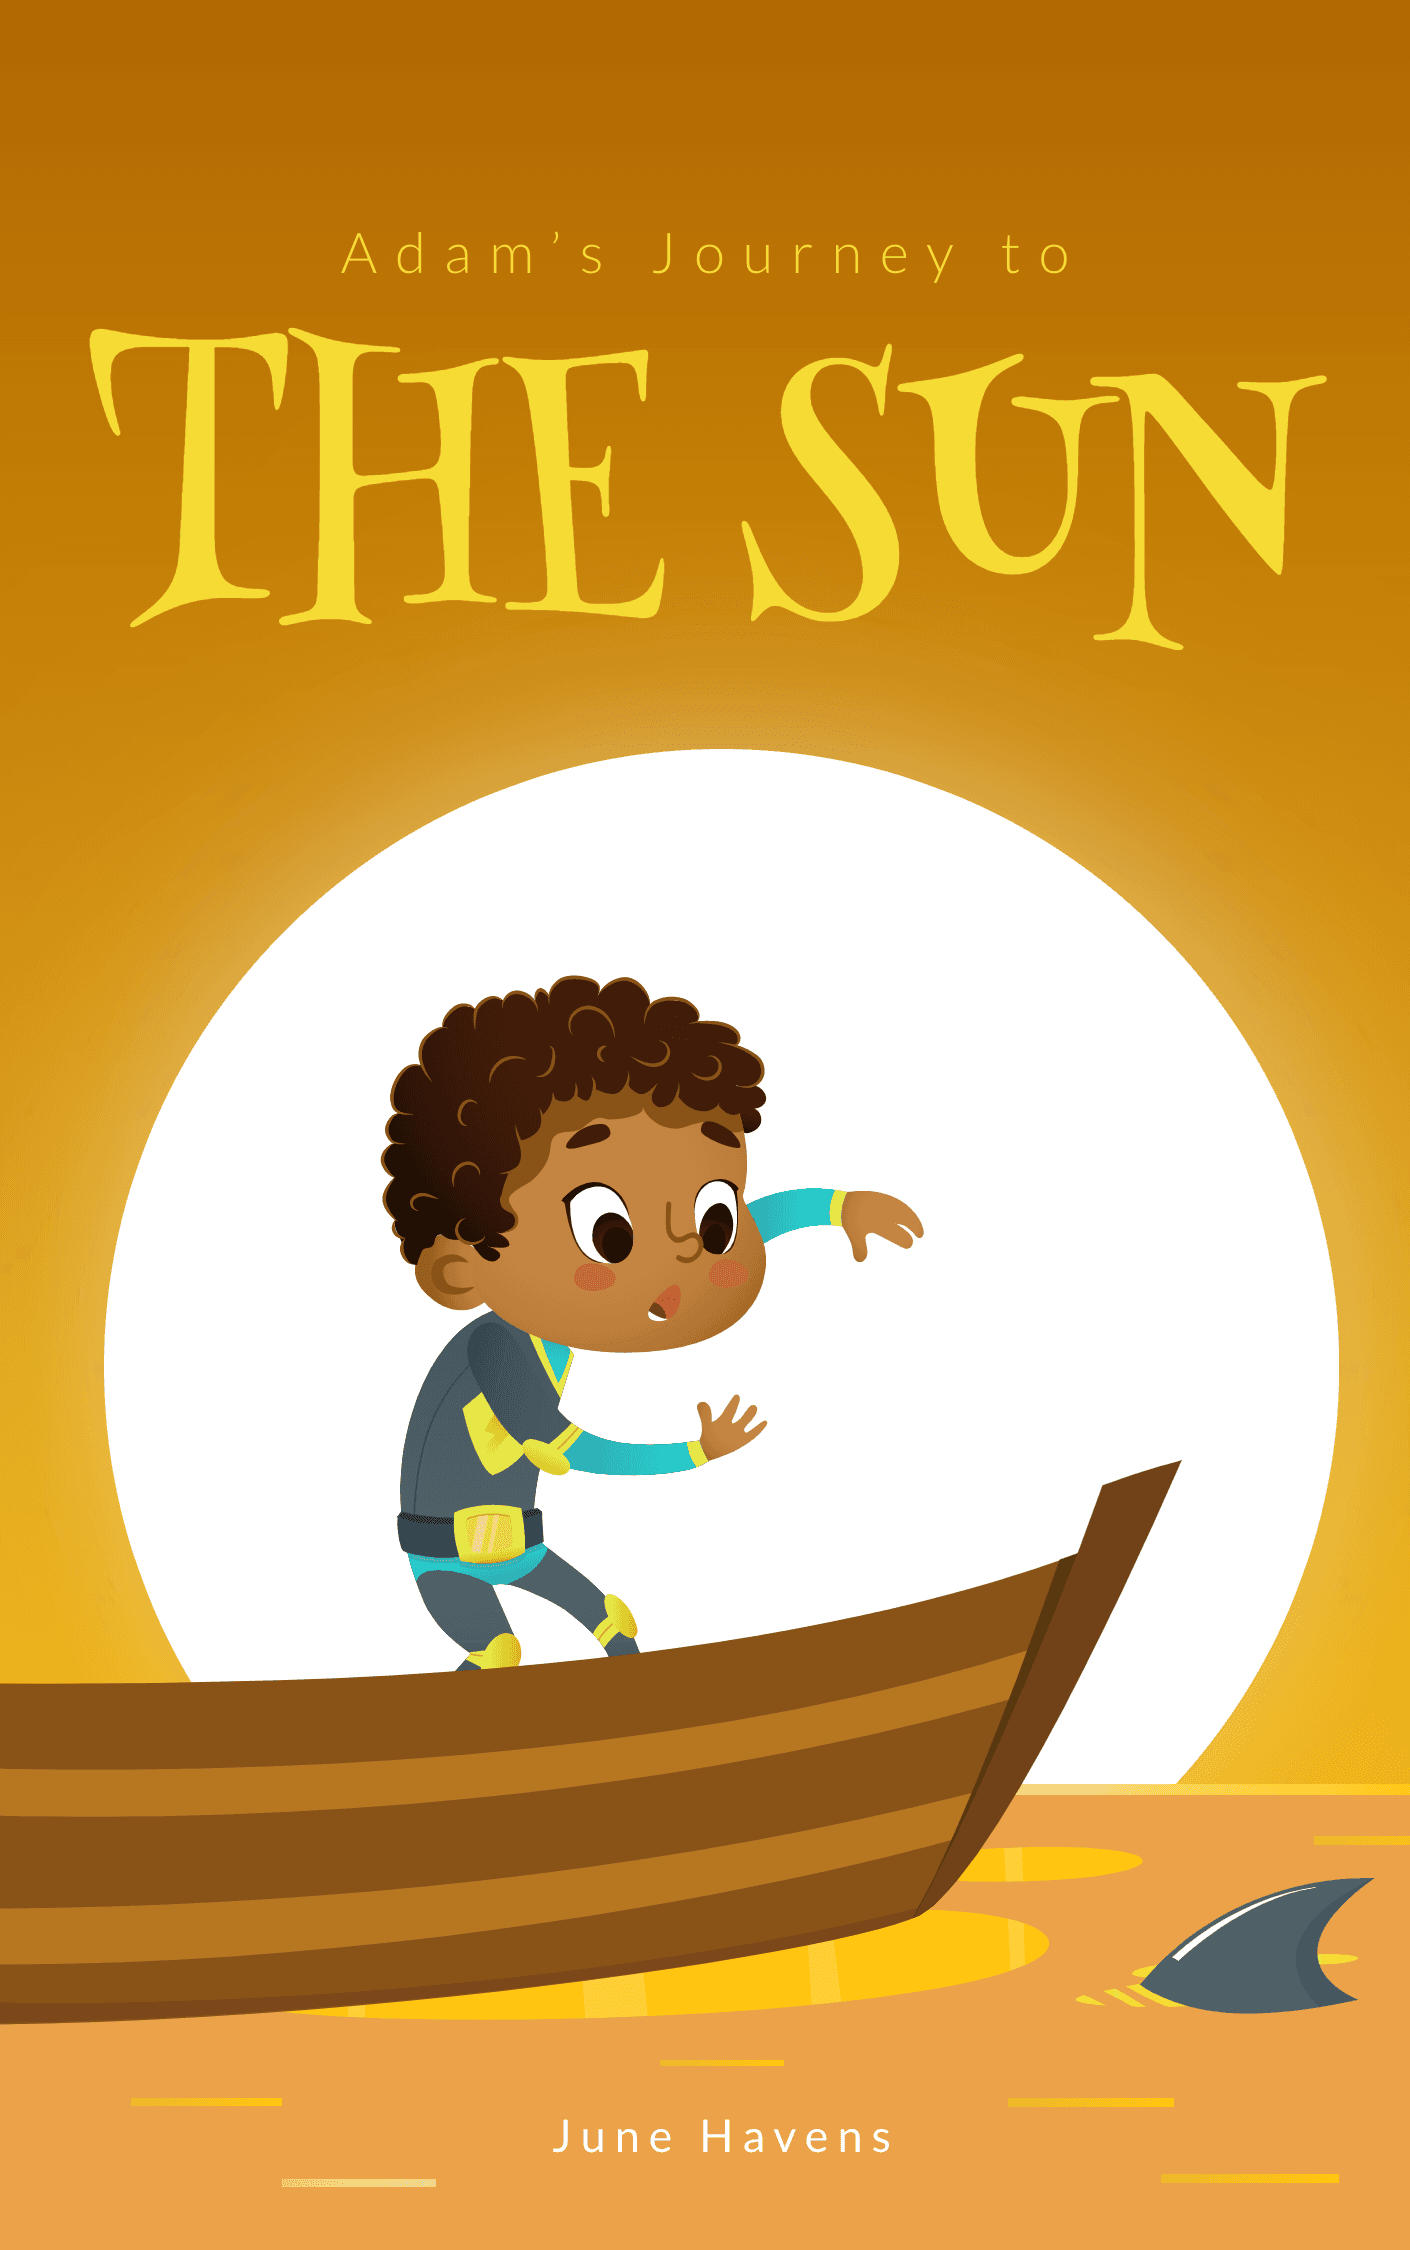 adams-journey-to-the-sun-travel-book-cover-template-thumbnail-img